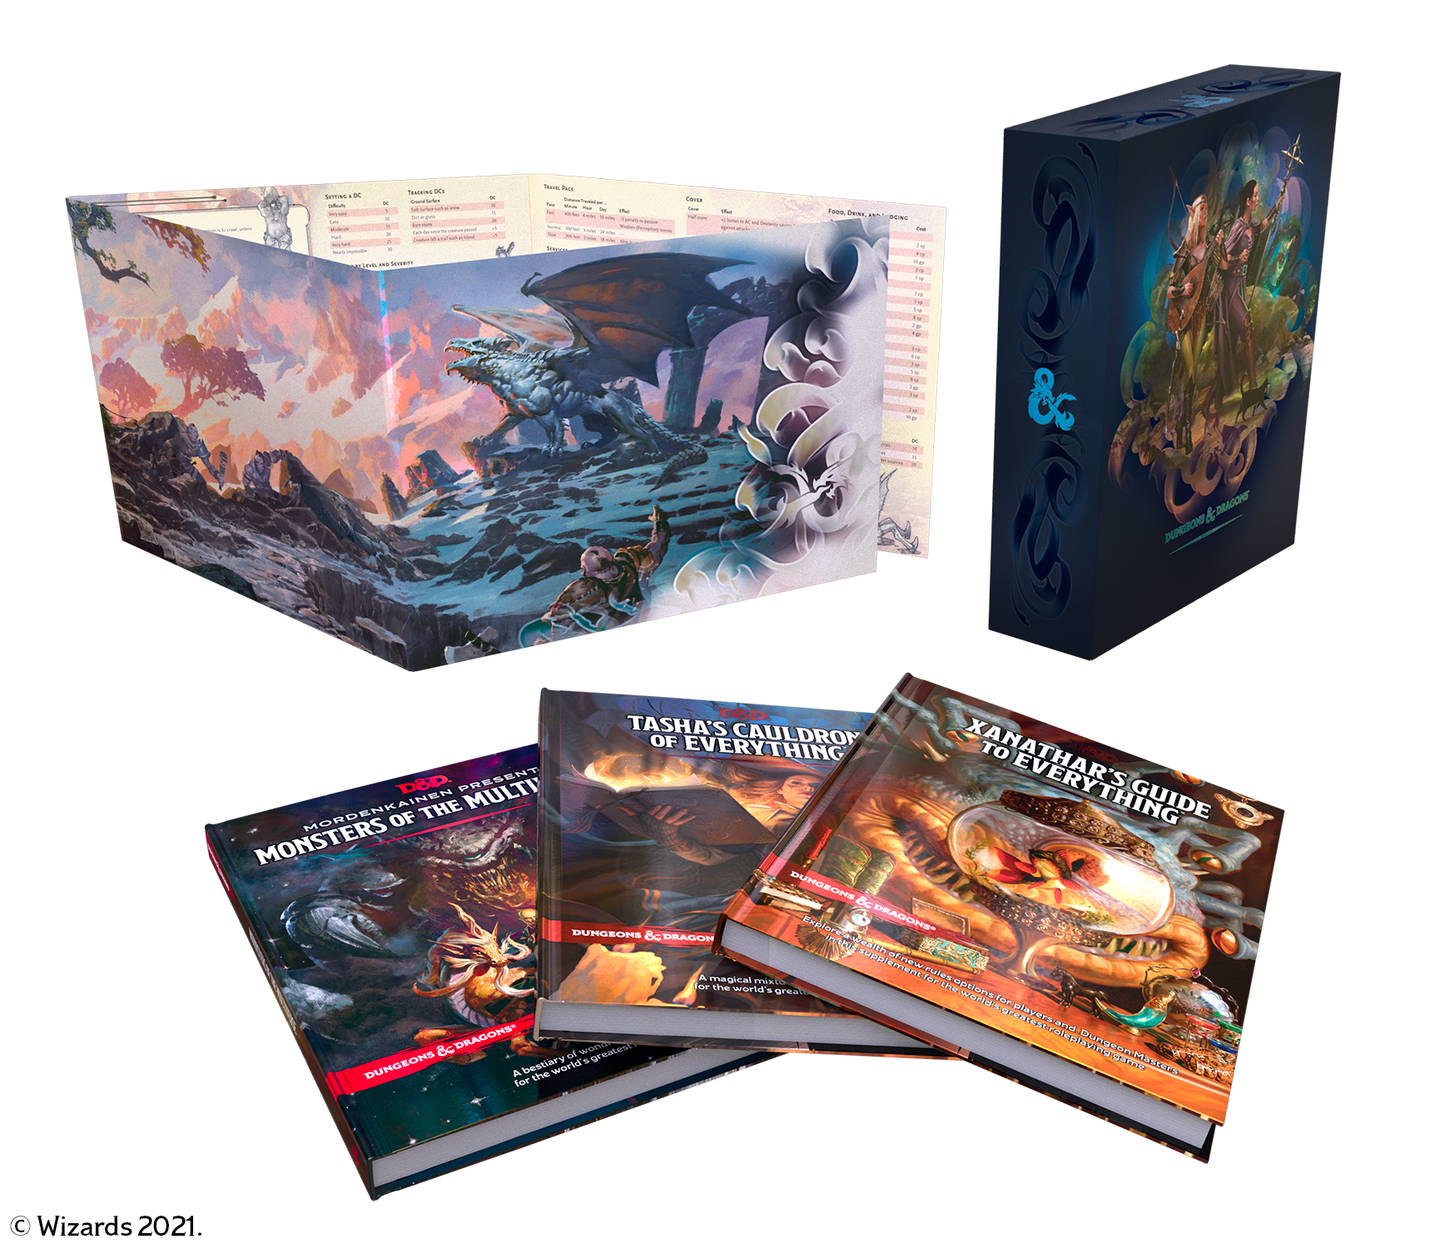 Dungeons & Dragons 5e: Rules Expansion Gift Set